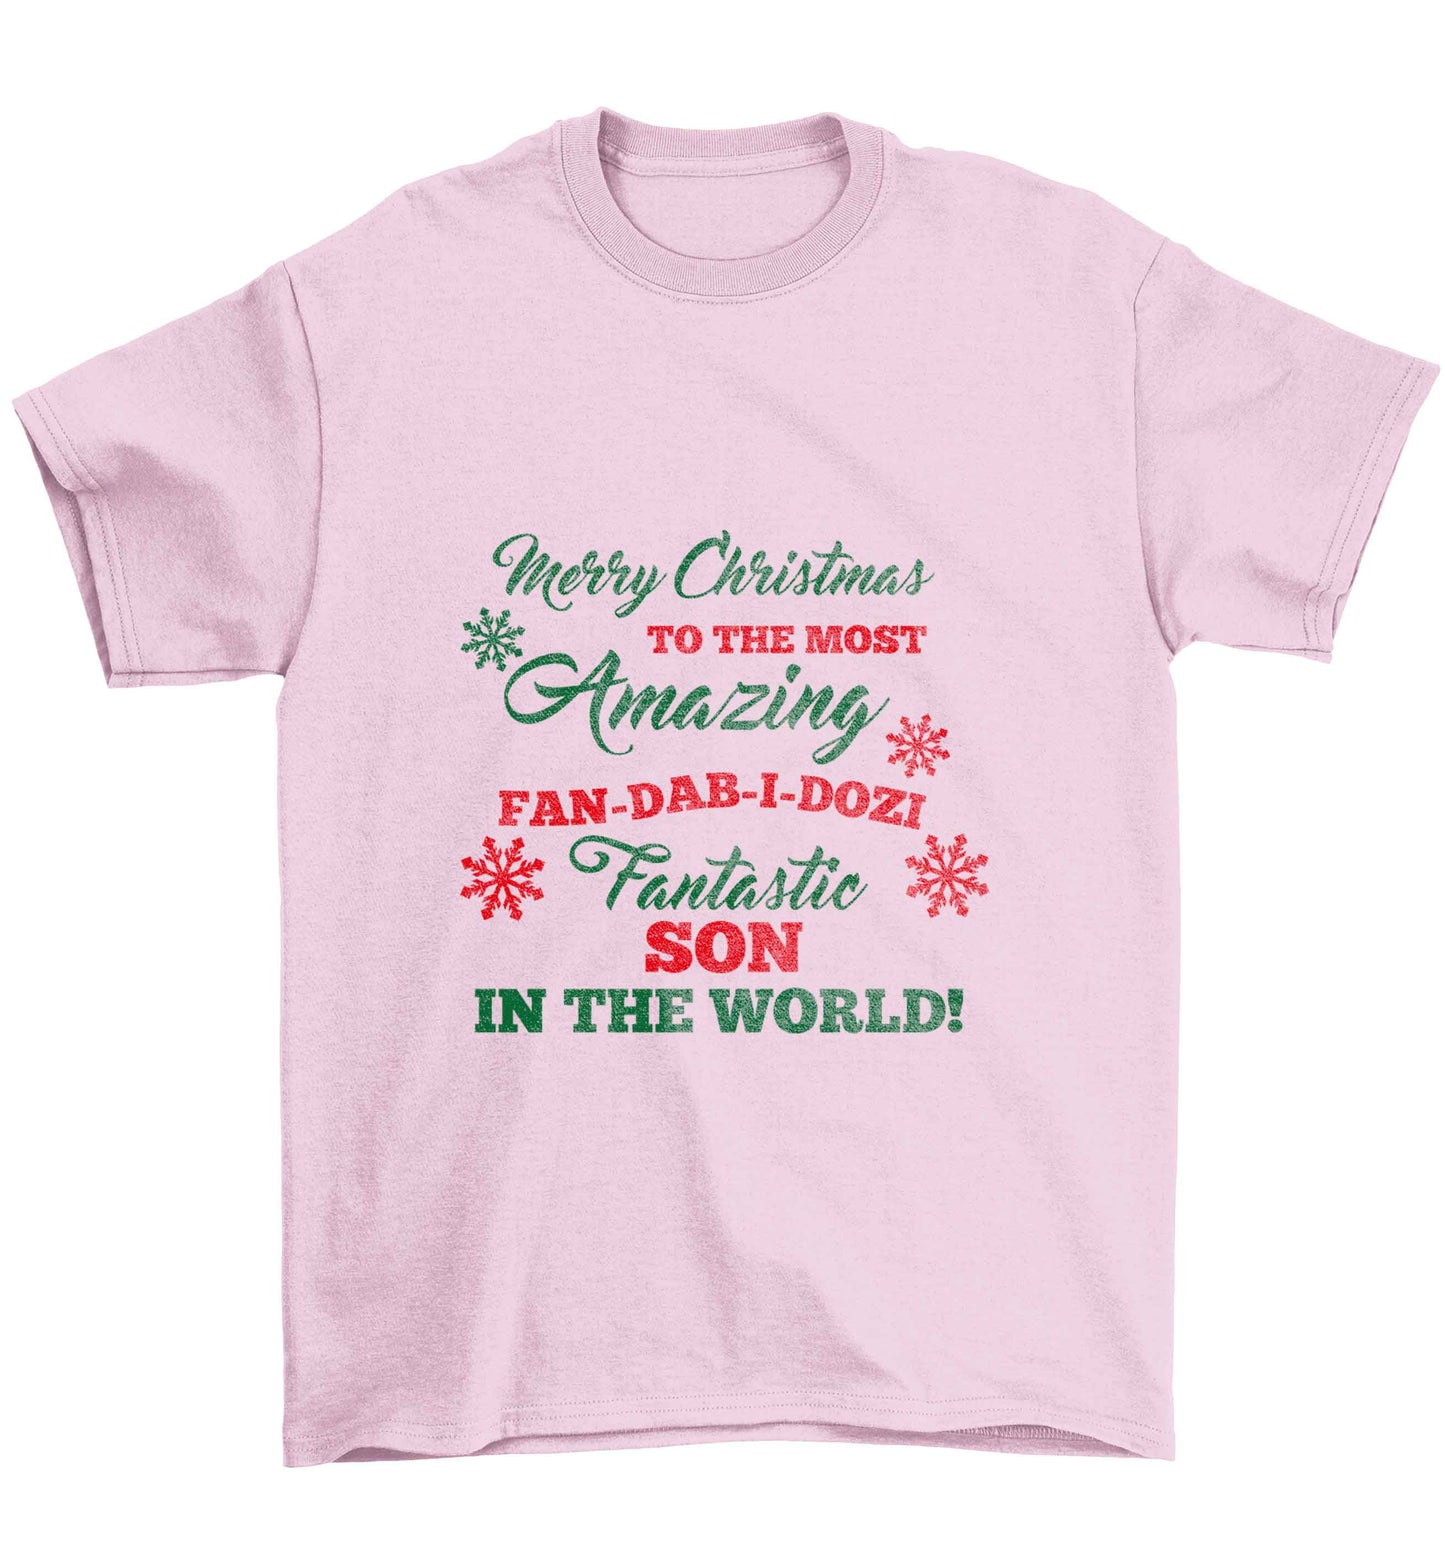 Merry Christmas to the most amazing fan-dab-i-dozi fantasic Son in the world Children's light pink Tshirt 12-13 Years